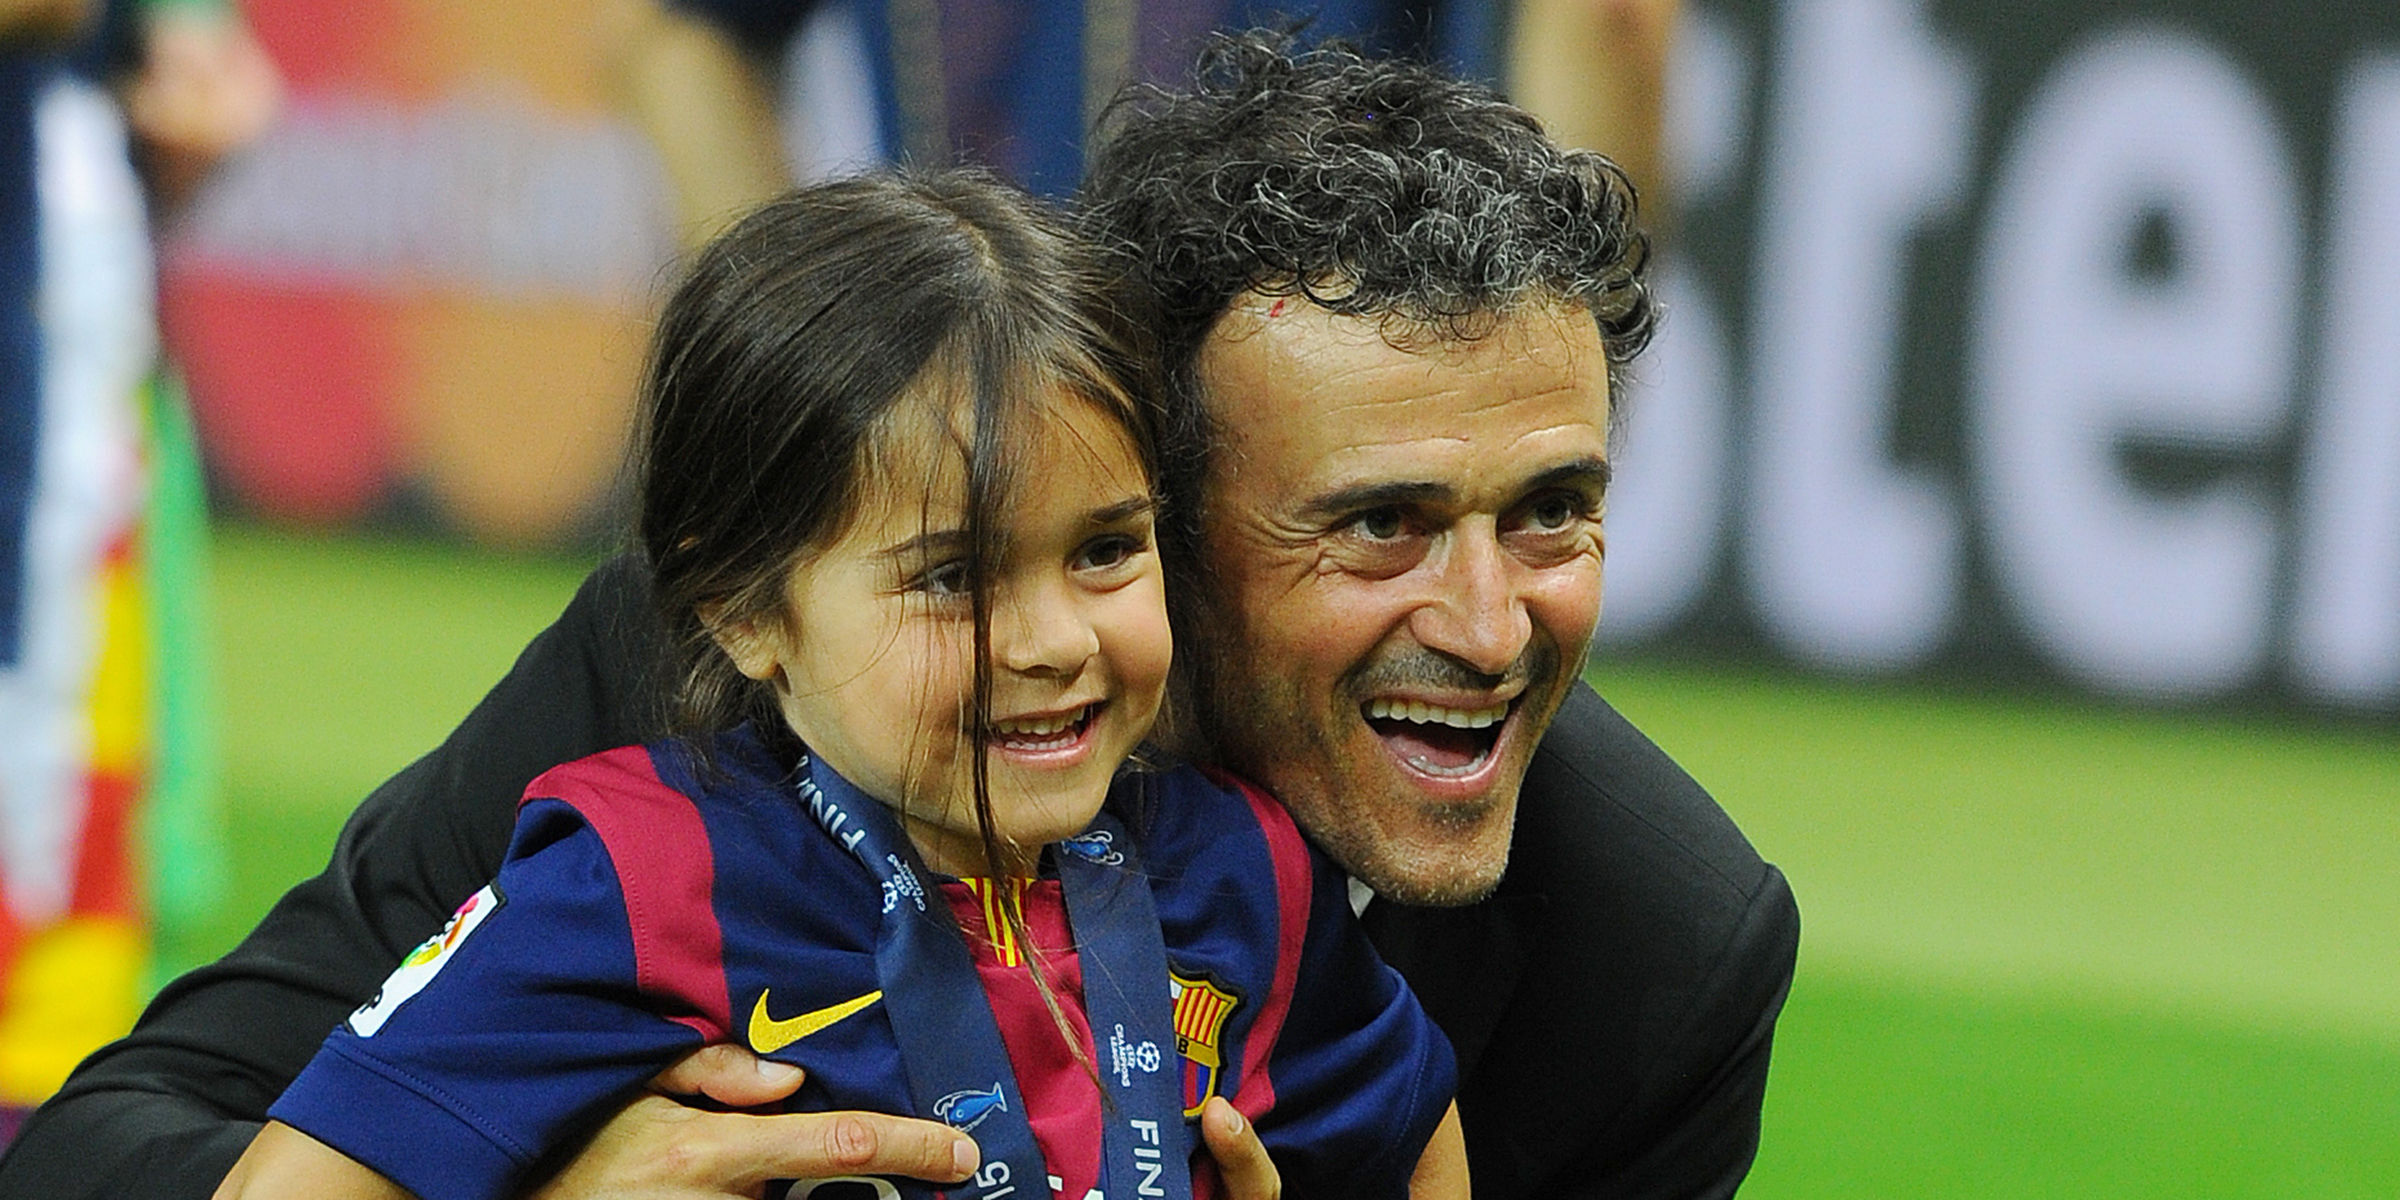 Who was Xana Martnez, Luis Enrique’s 9-year-old daughter that died of cancer?